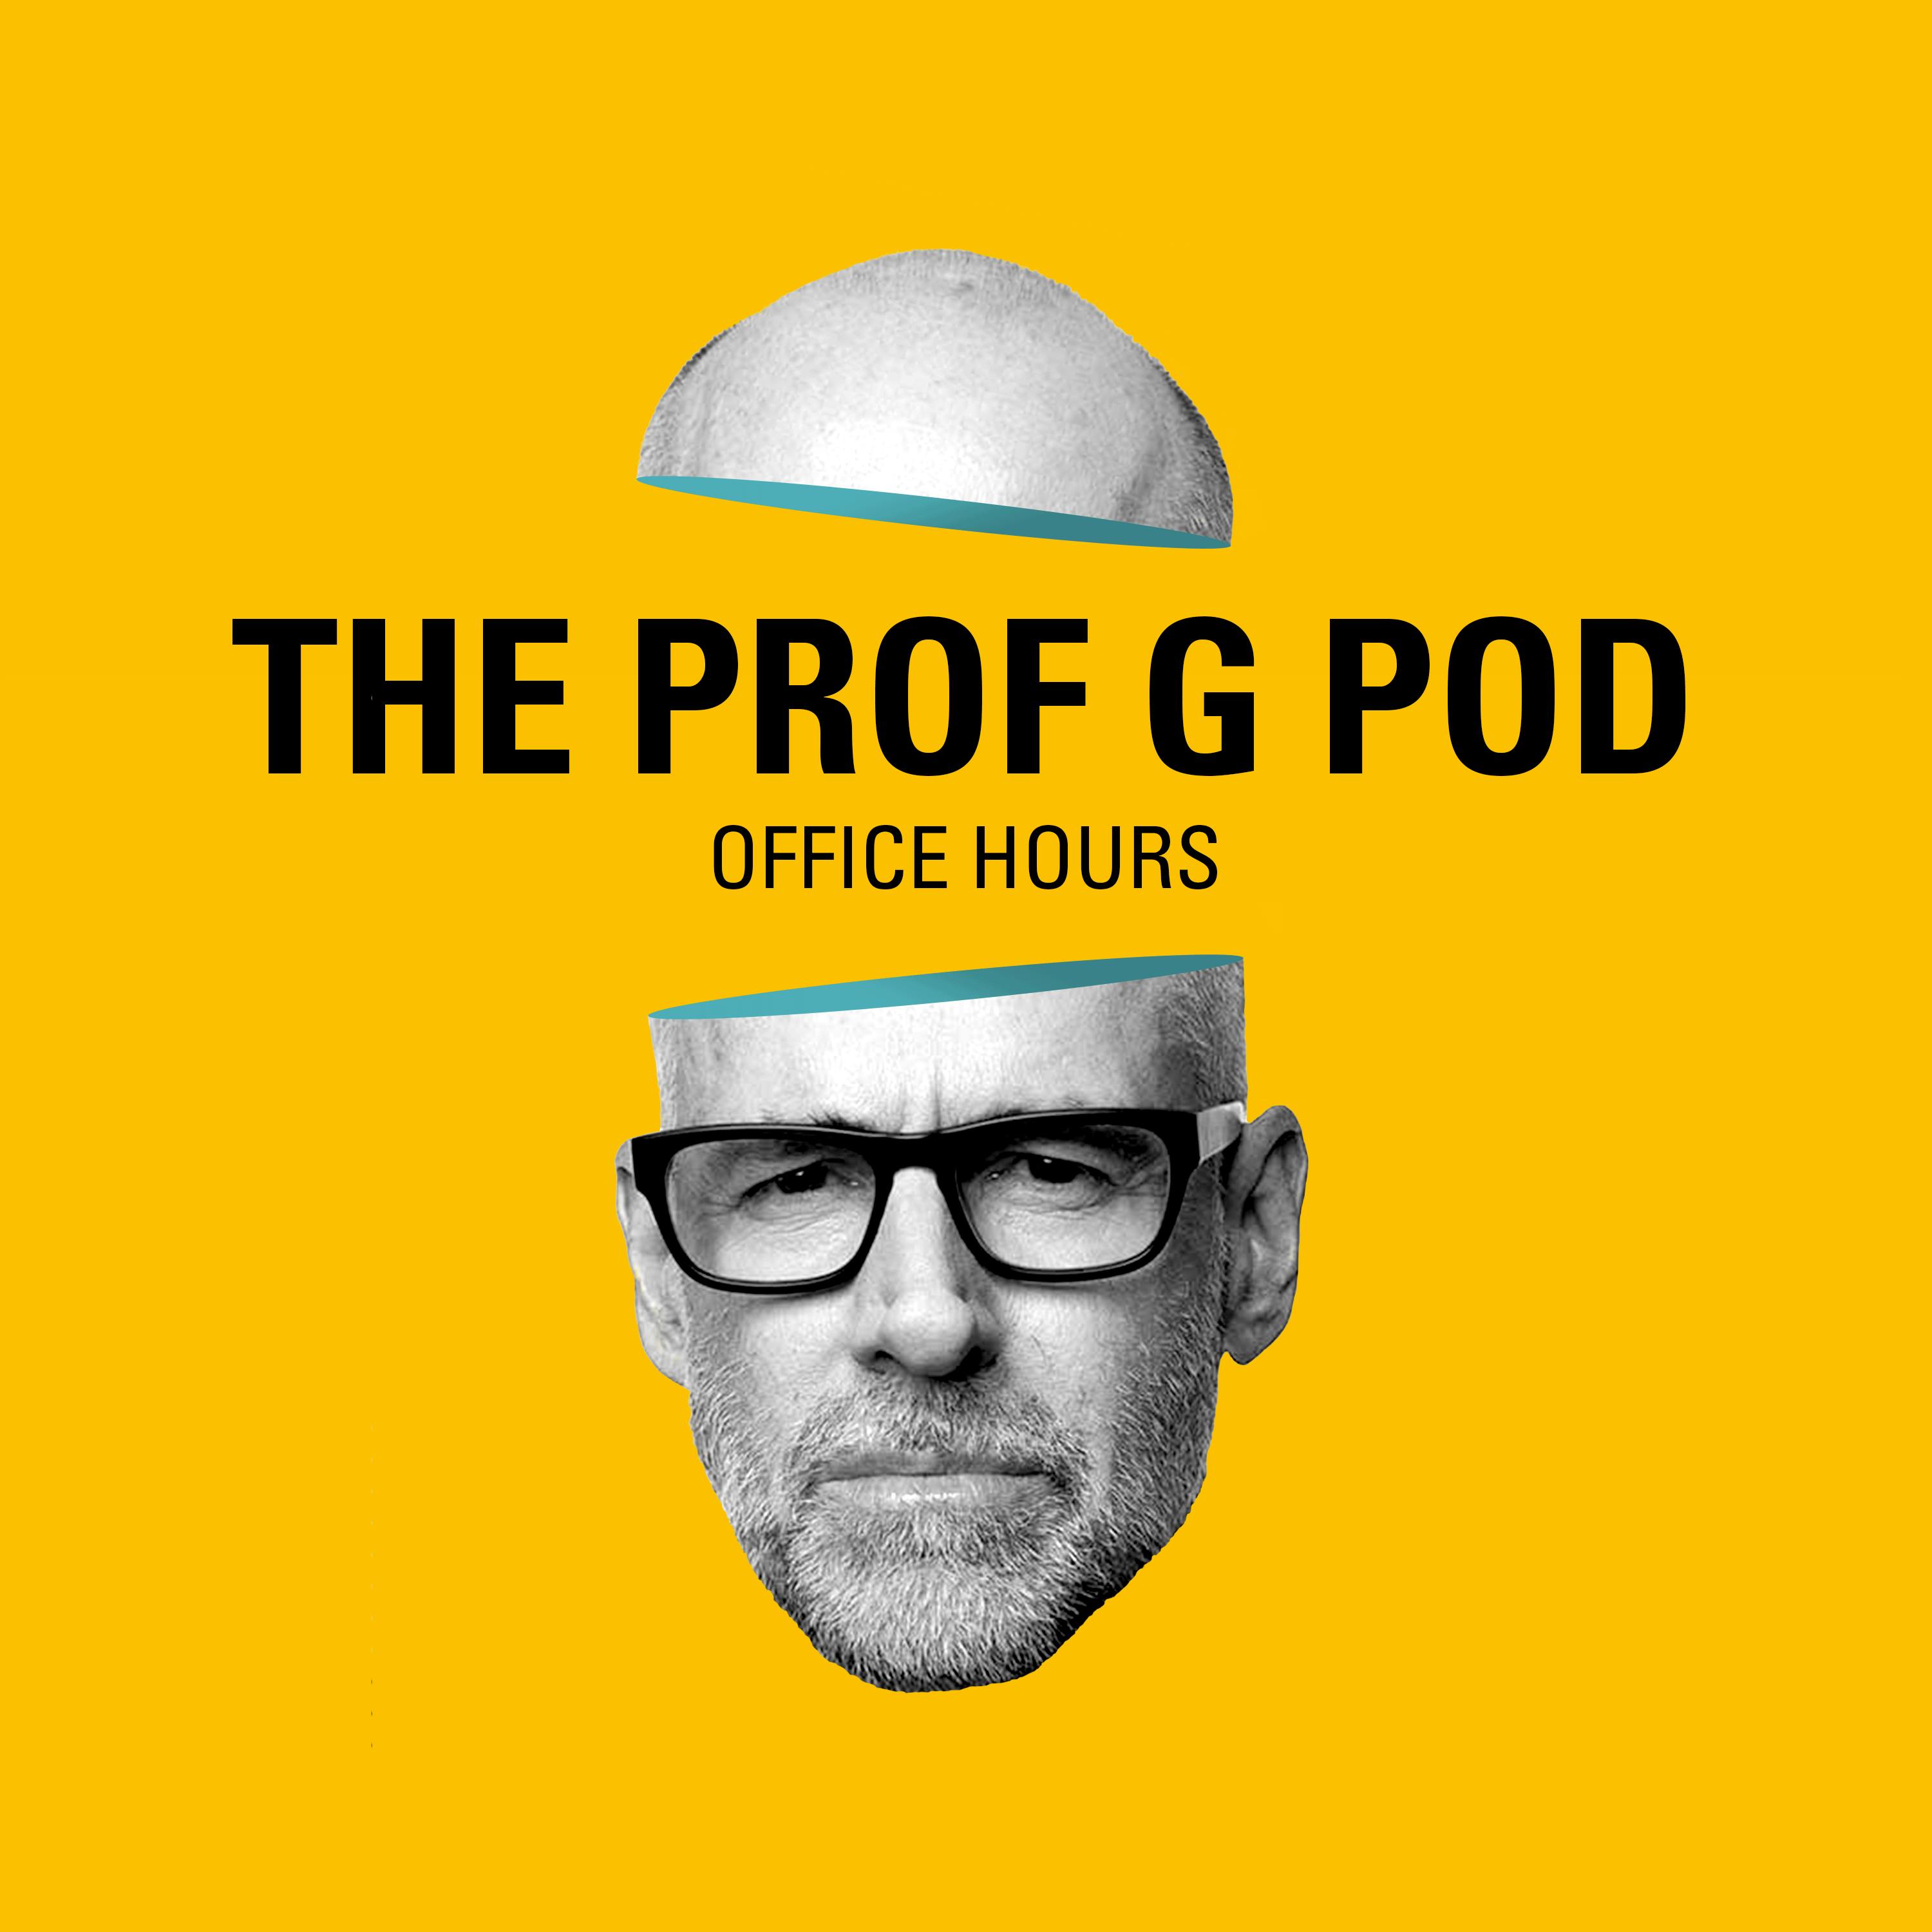 Office Hours: Web3 Unlocks, Podcast Subscriptions vs Ads, and Transitioning to a Smaller Company by Vox Media Podcast Network